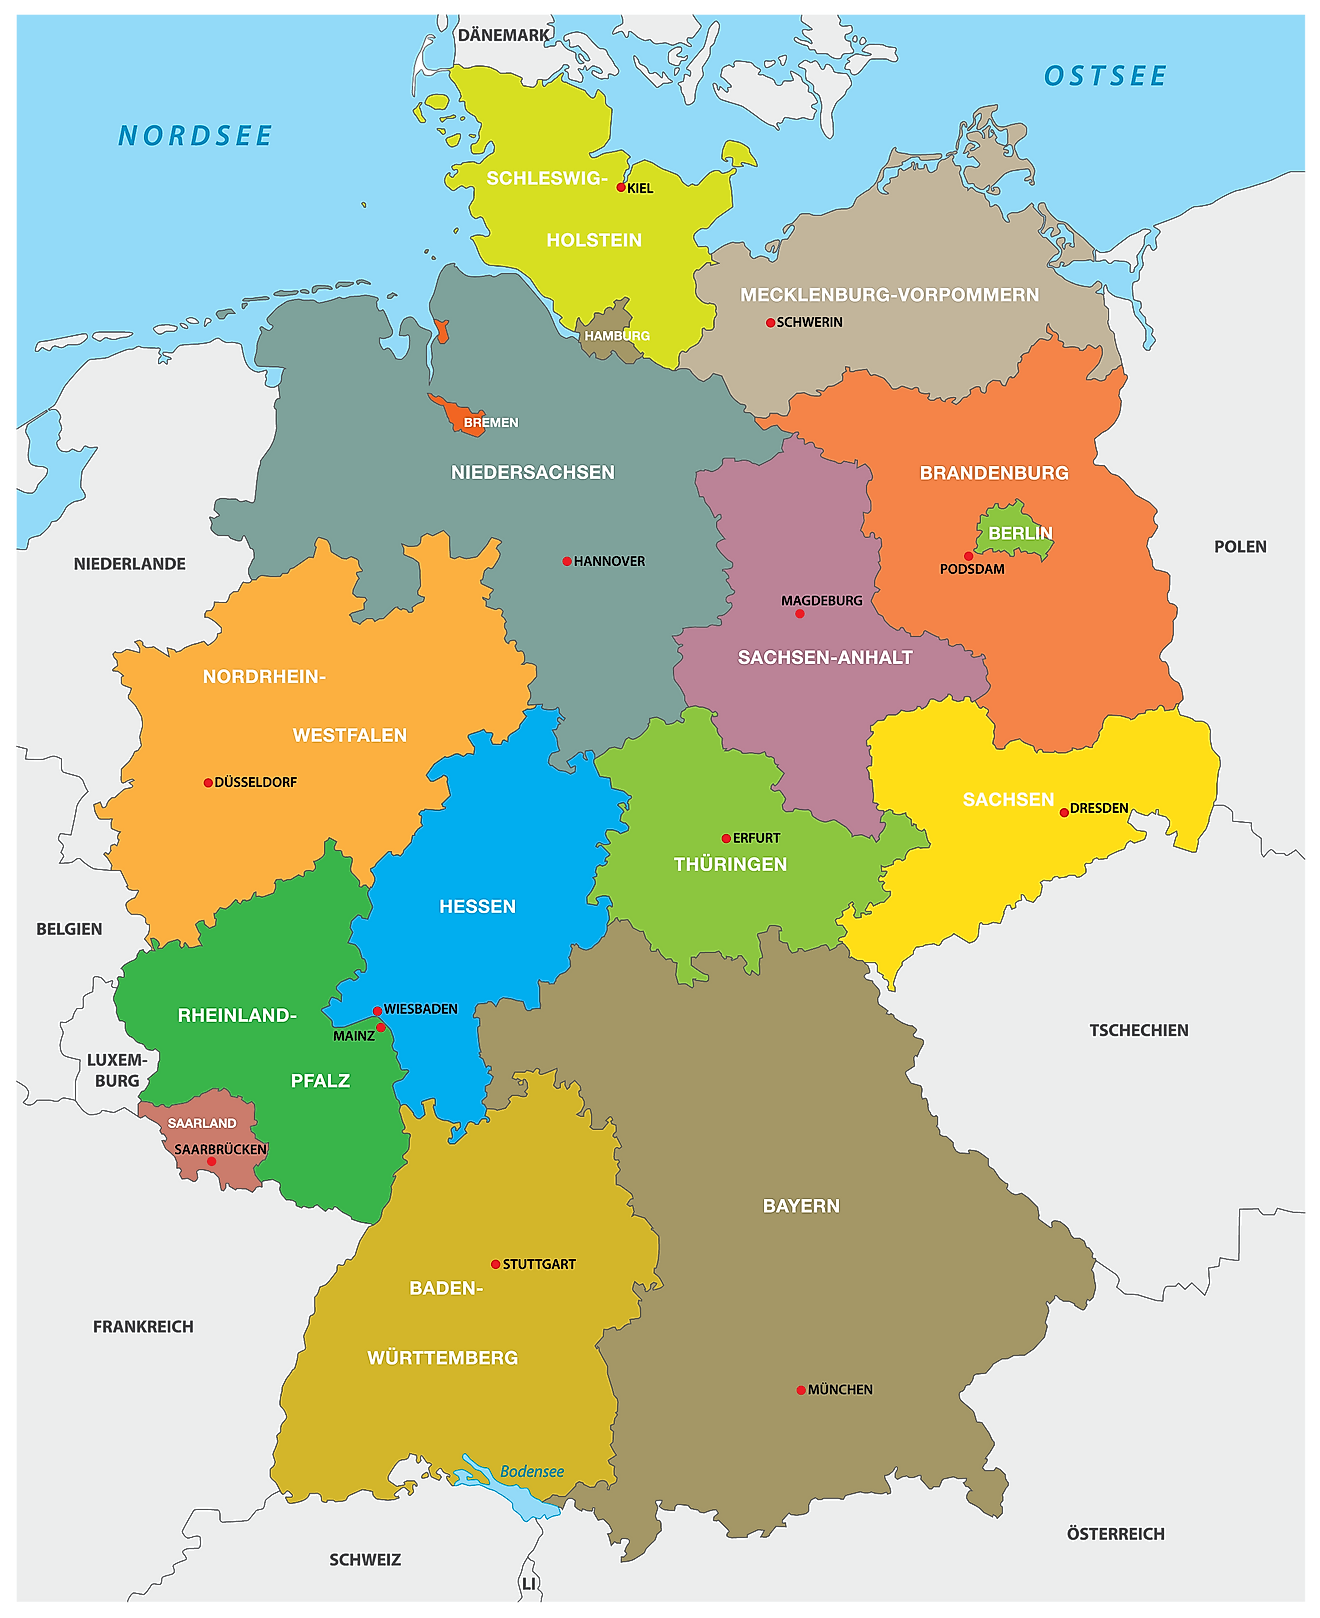 Political Map of Germany showing its 16 states and the capital city of Berlin.